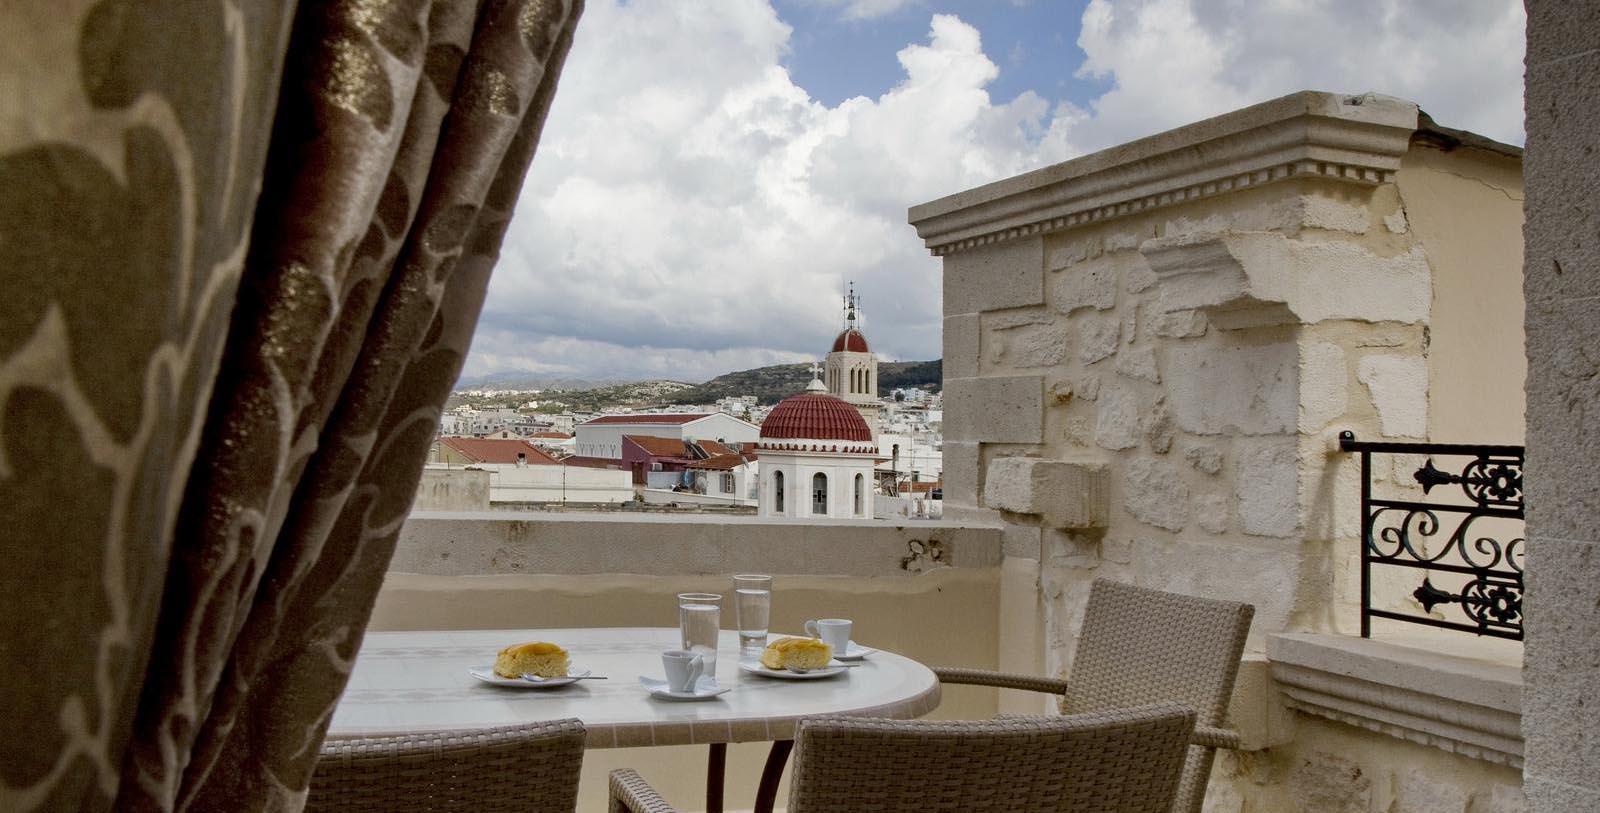 Discover the Antica Dimora Suites, a historic home from the 19th century that has hosted many Greek and Ottoman politicians and dignitaries as a hotel.